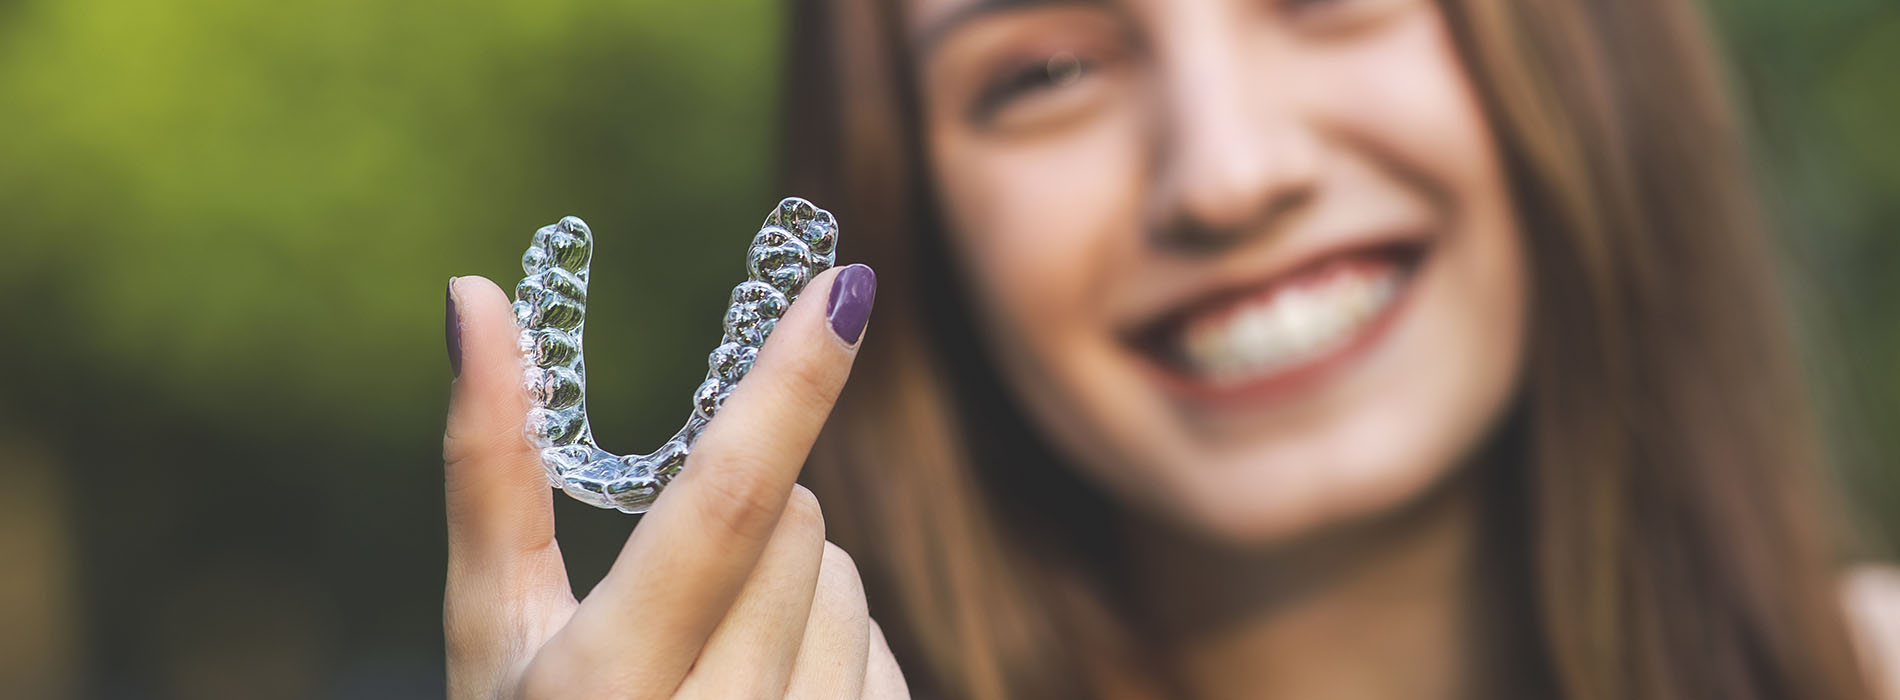 A person is holding a clear, plastic dental retainer in their hand.